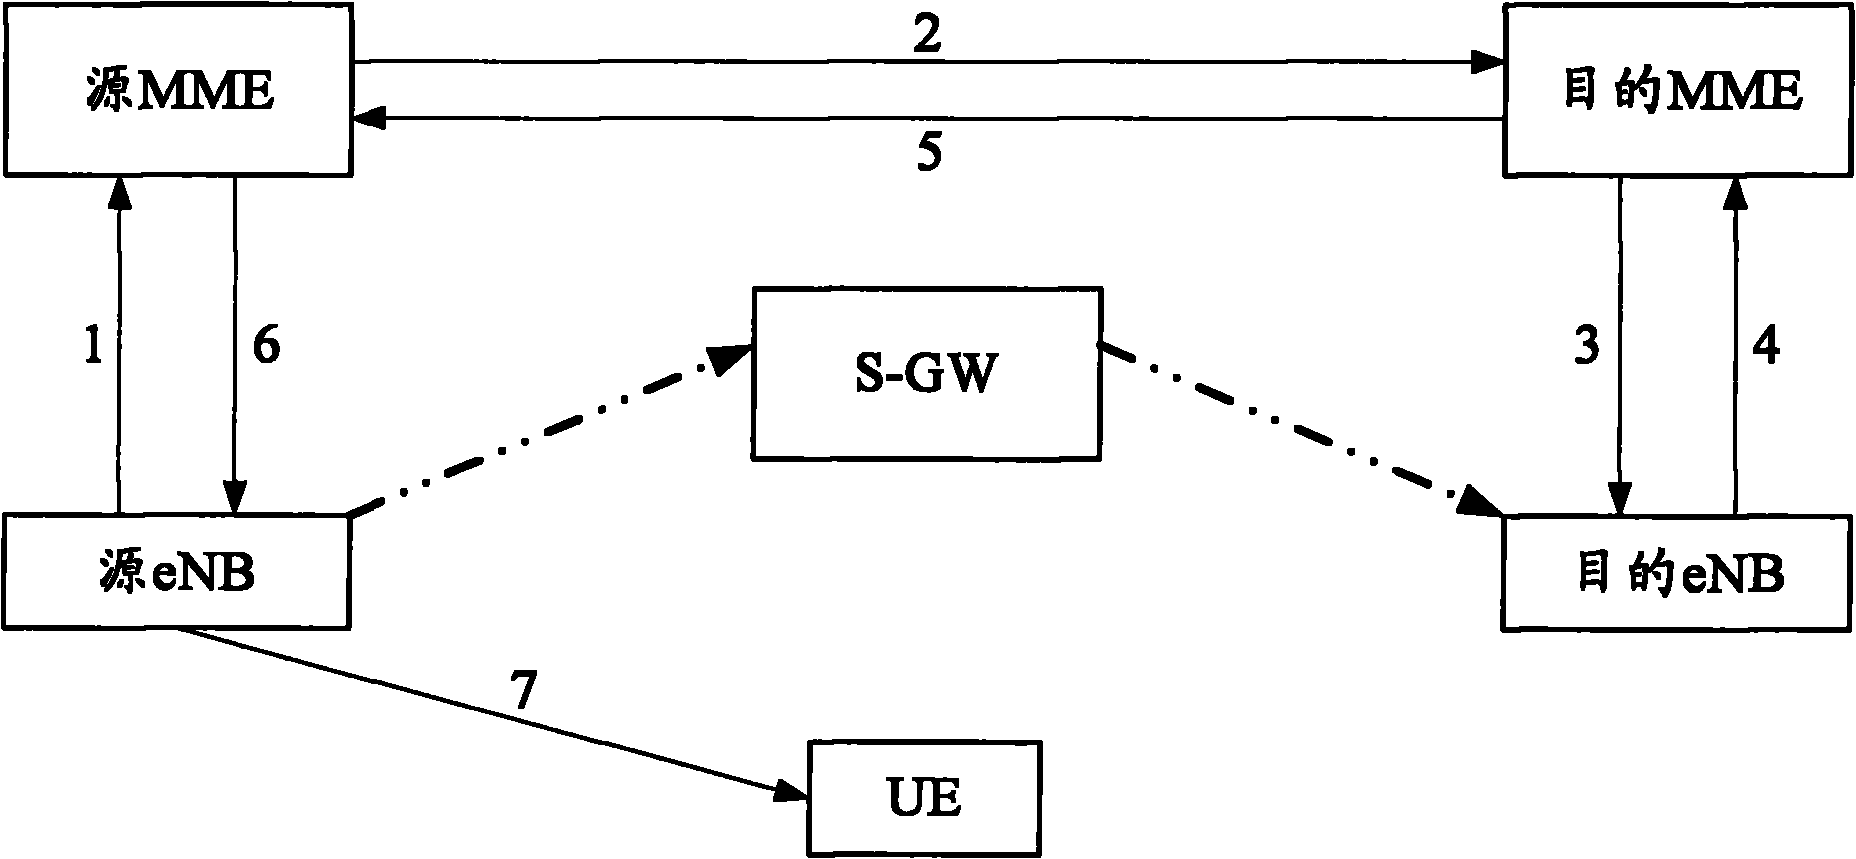 Downlink message forwarding method and serving gateway (S-GW)